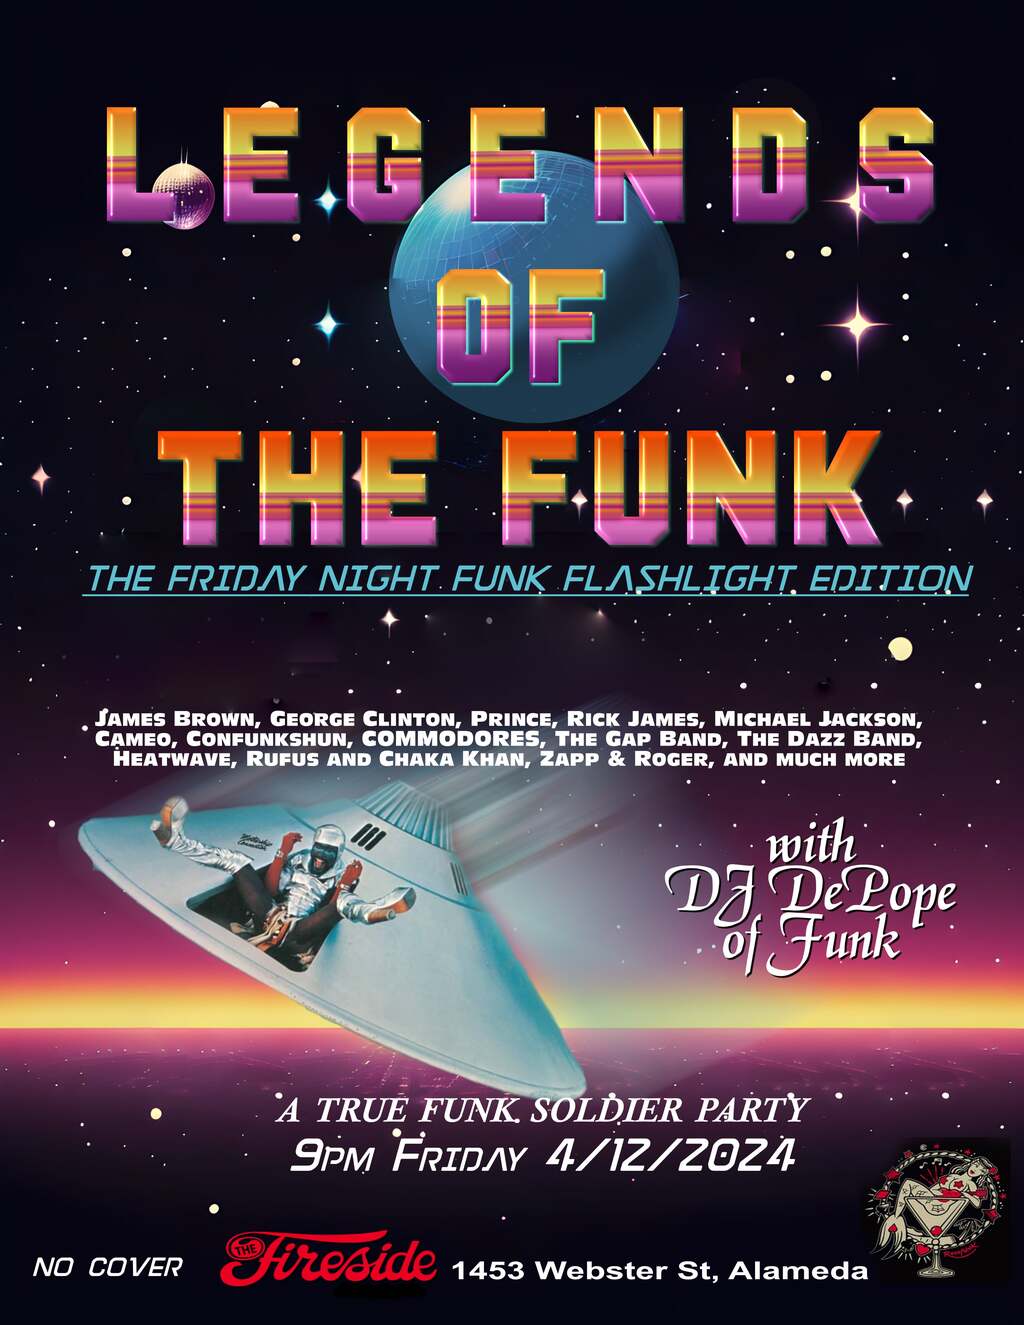 The Fireside Lounge A Night of Funk at The Fireside Lounge promotion flier on Digifli com